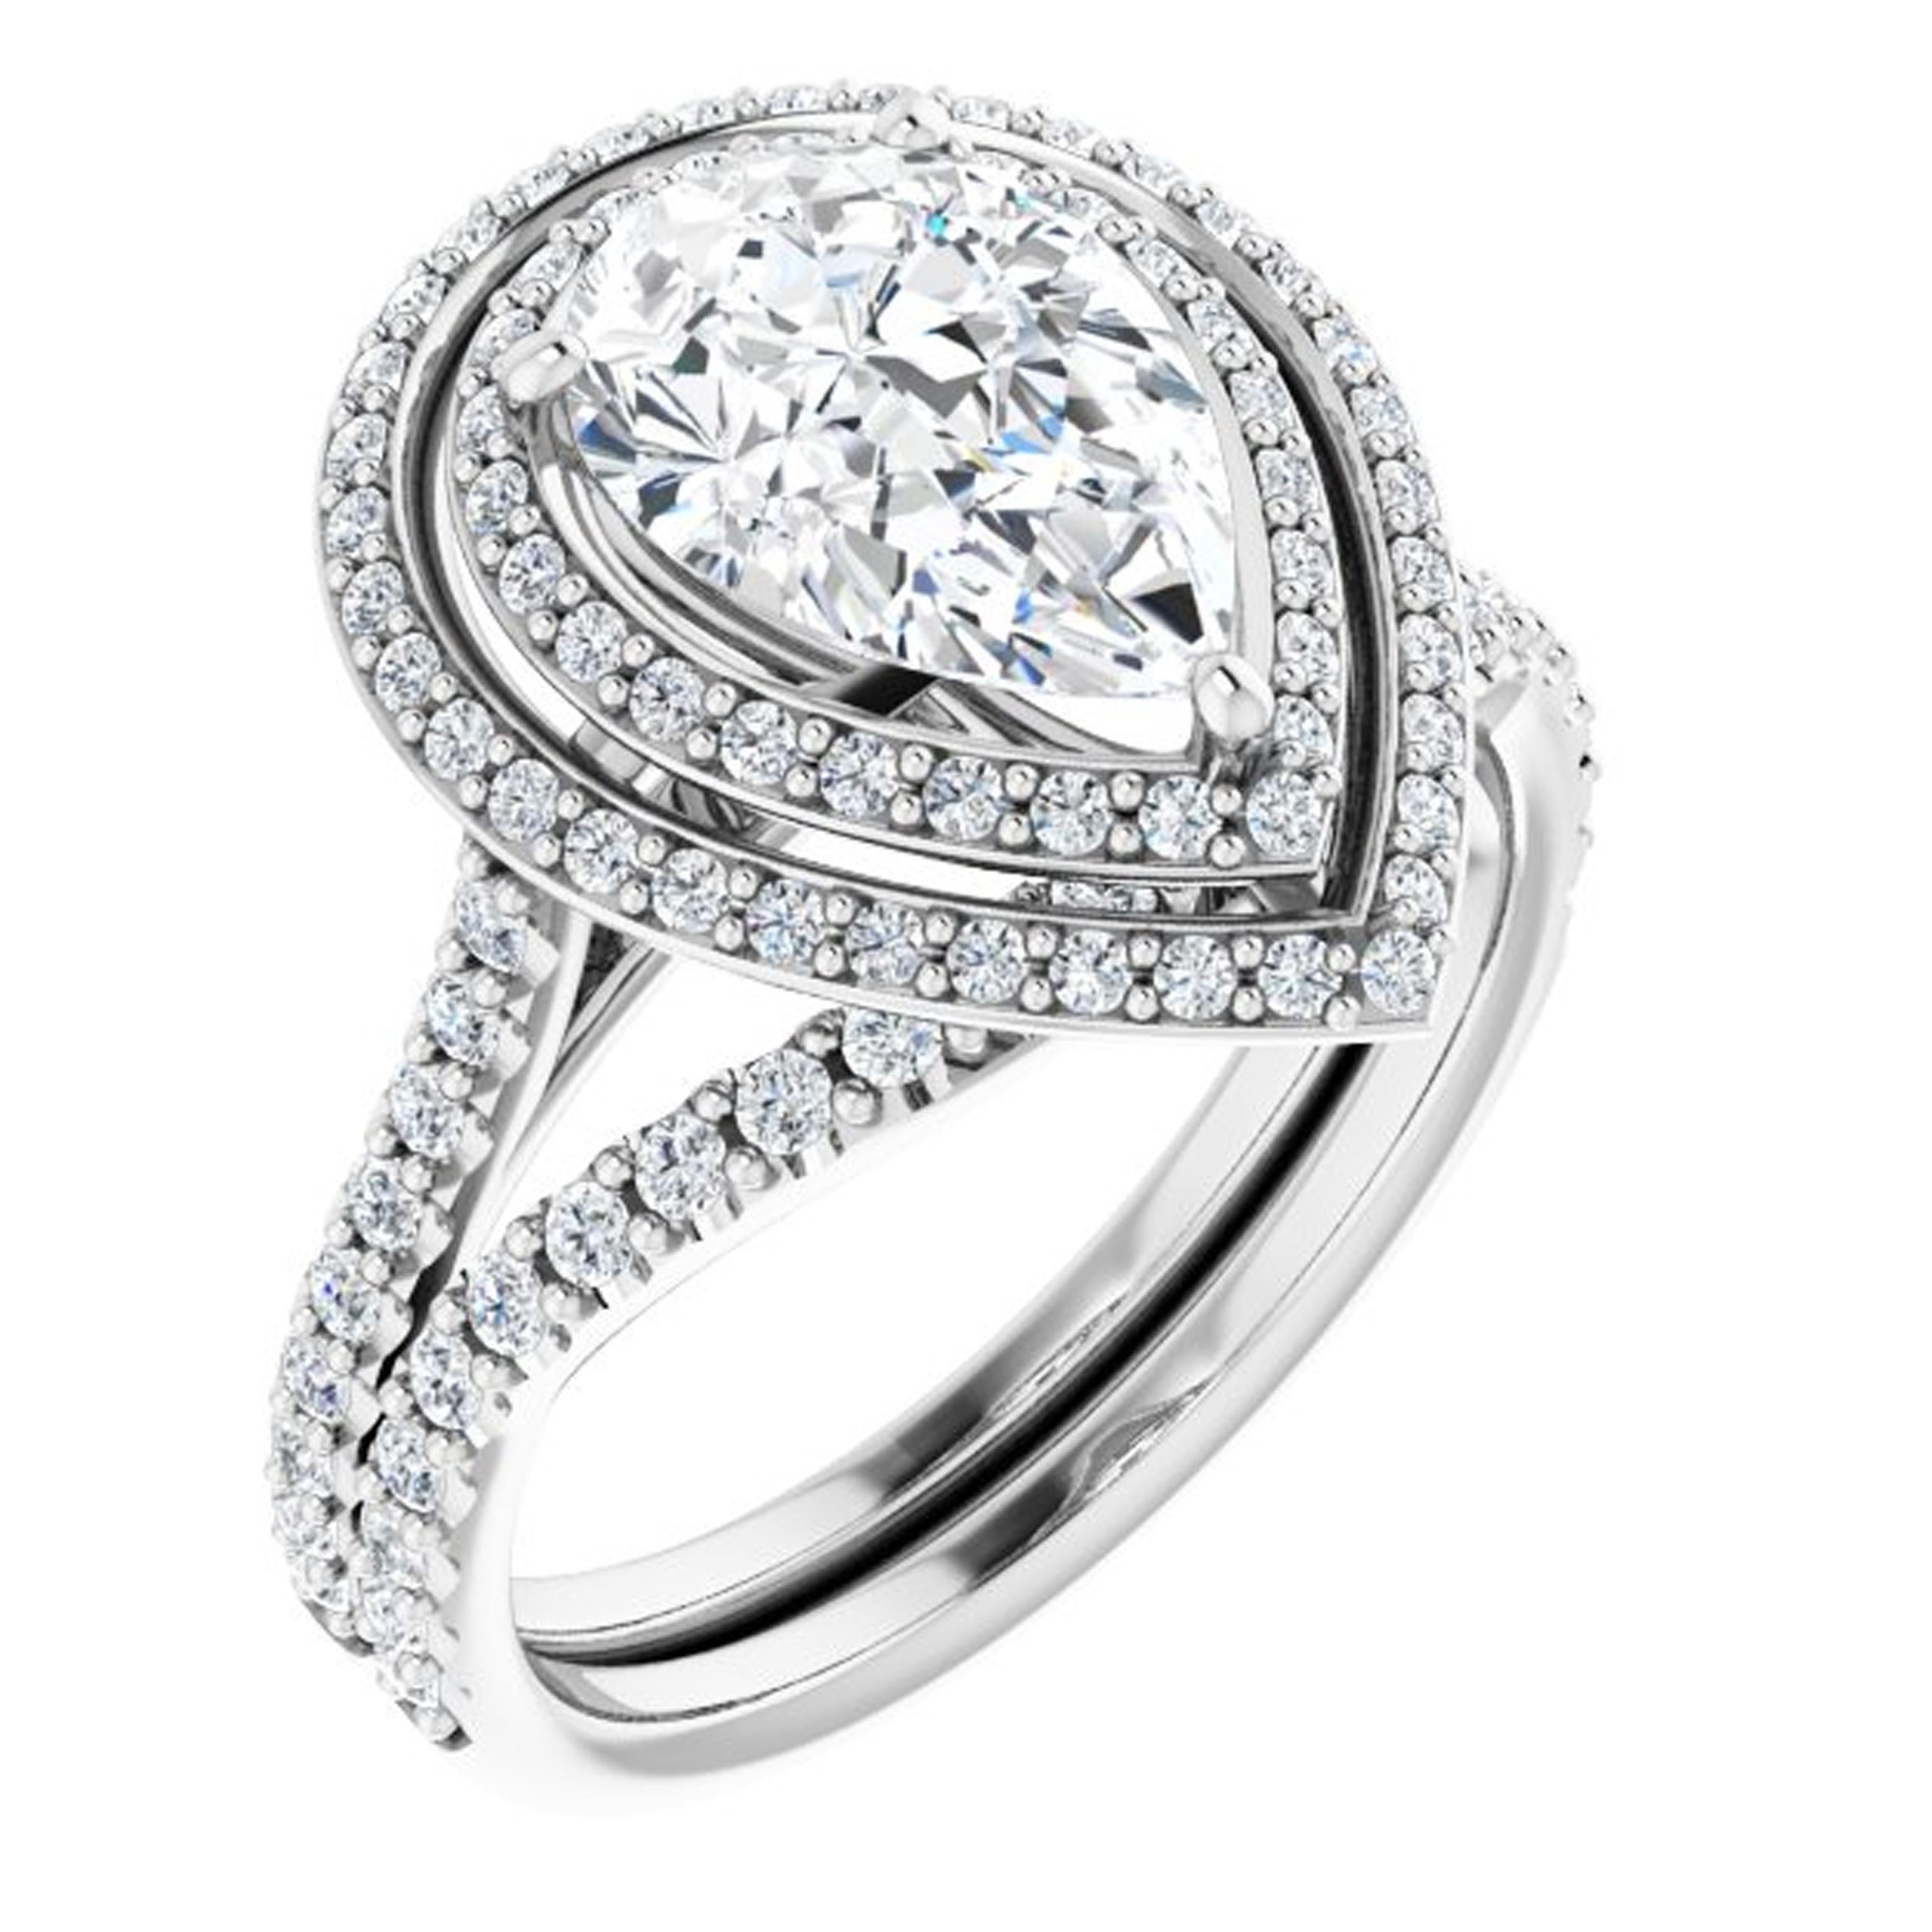 Enhancing the GIA certified center stone and making it appear a lot bigger, shimmering diamonds surround the double halo of this Valorenna one of a kind engagement ring. Additional diamonds line the shank and a high-polish finish strikes unmatched